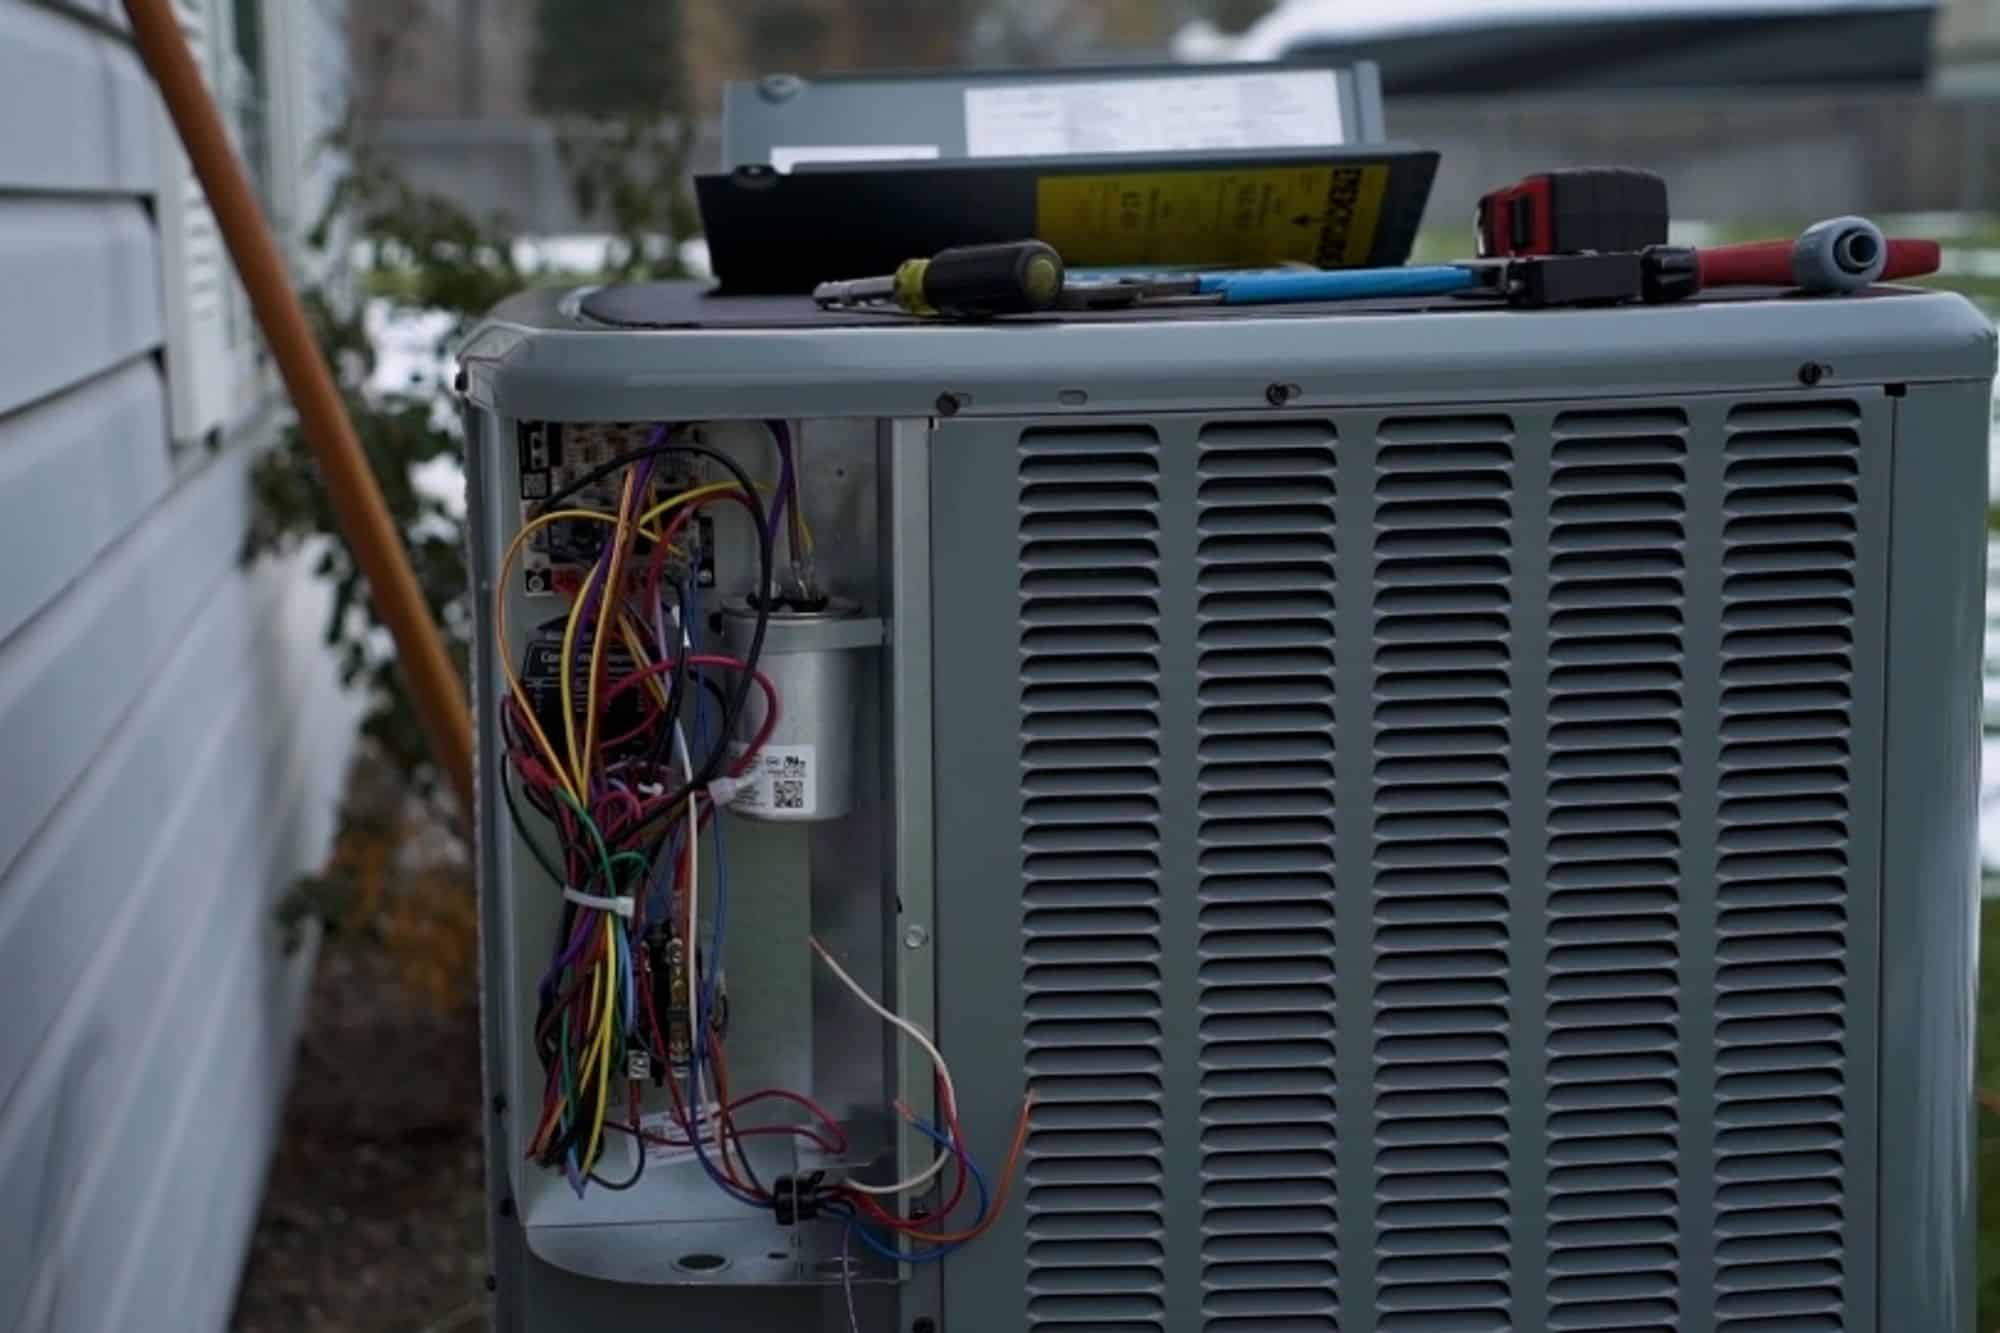 A detailed look at the electric system powering an air conditioner unit